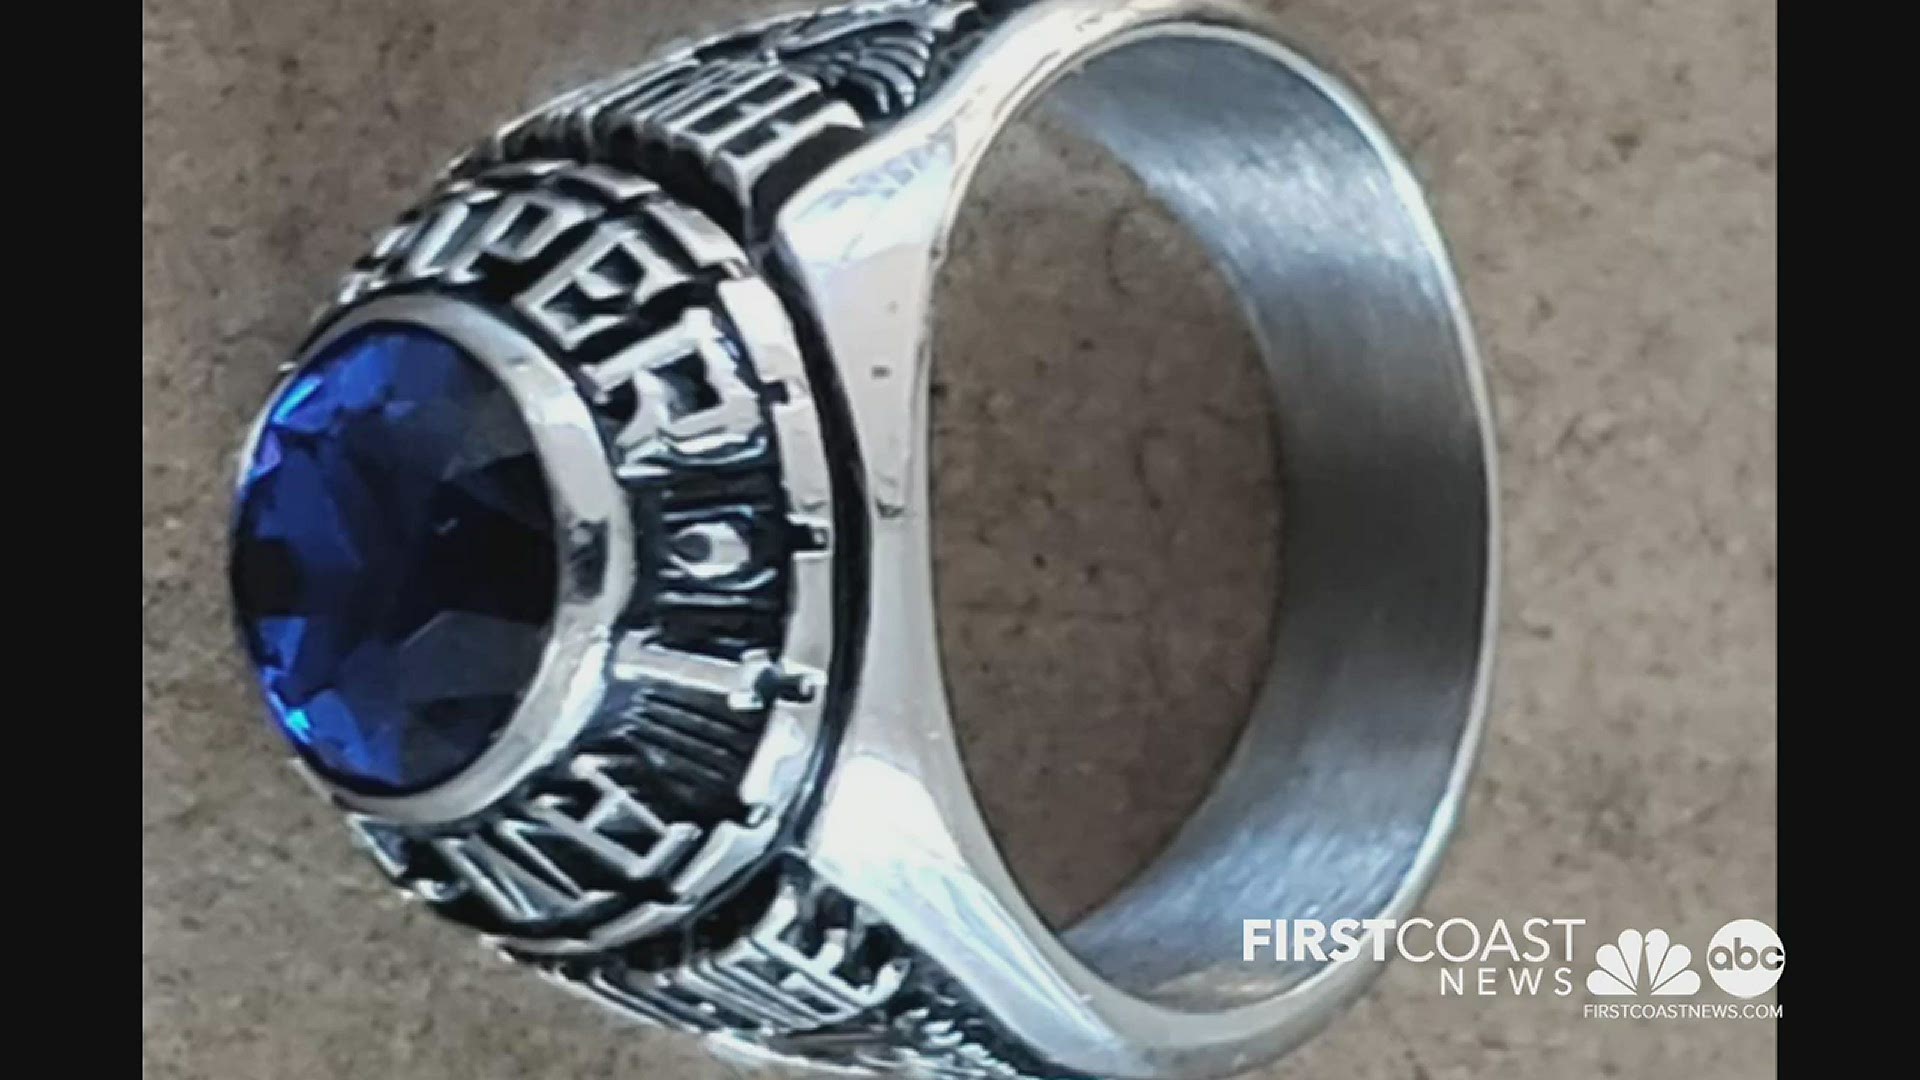 Bono's: Duval Station shared photos of the ring on Facebook, hoping to reunite the ring with its owner.